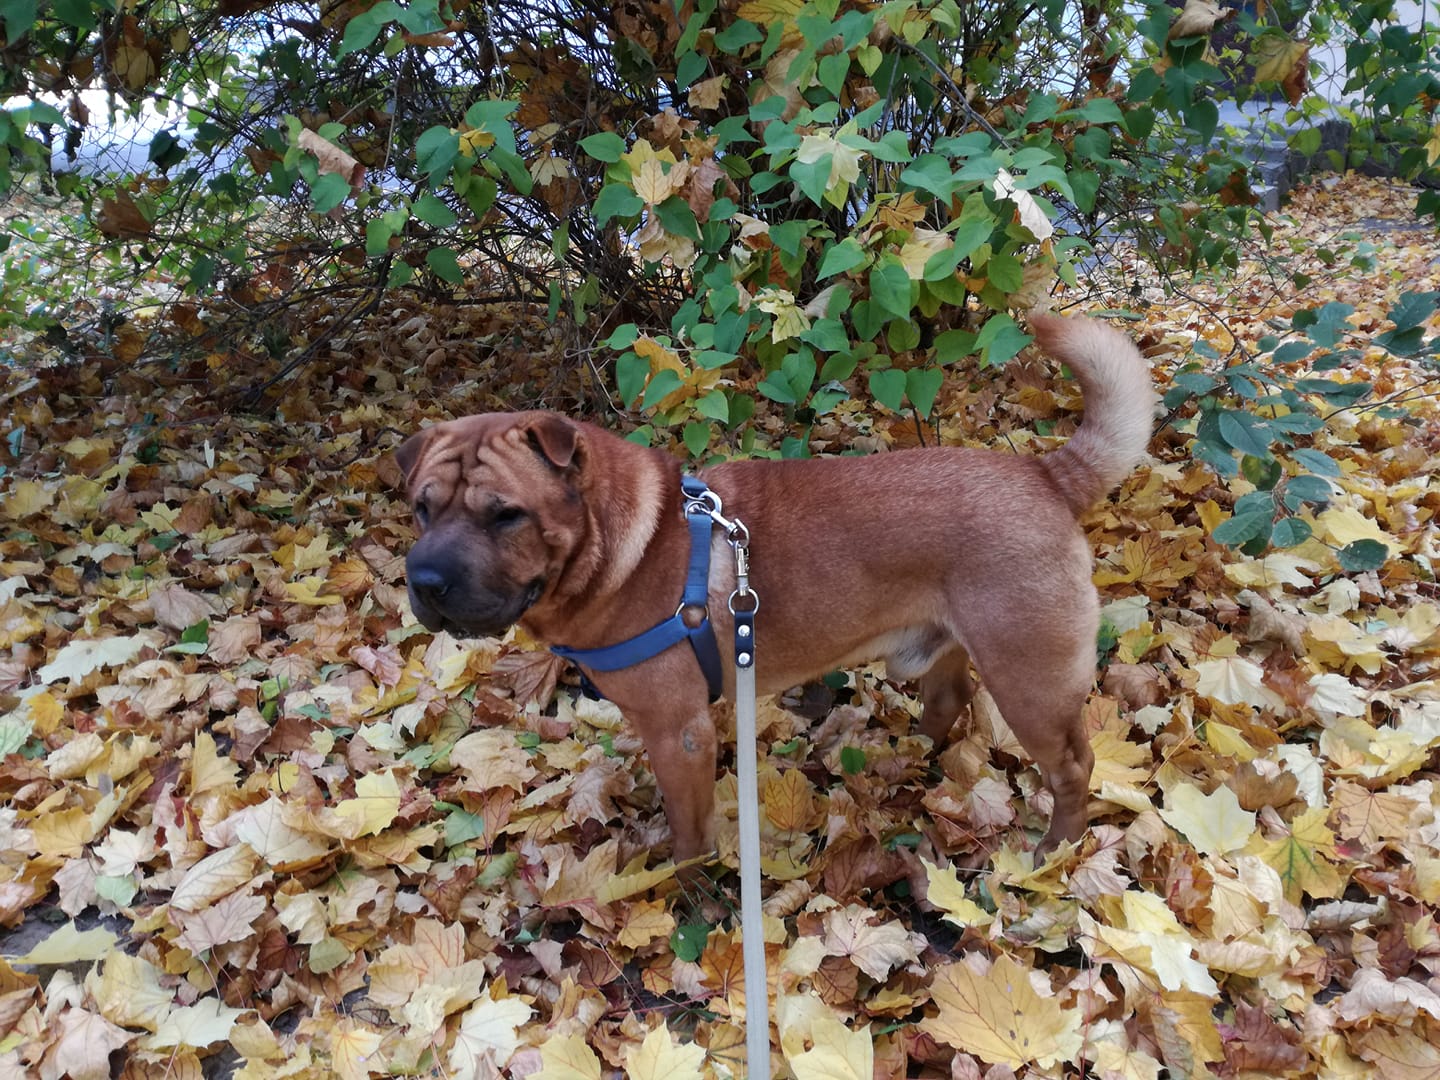 A Shar-Pei standing on top of the dried leaves at the park